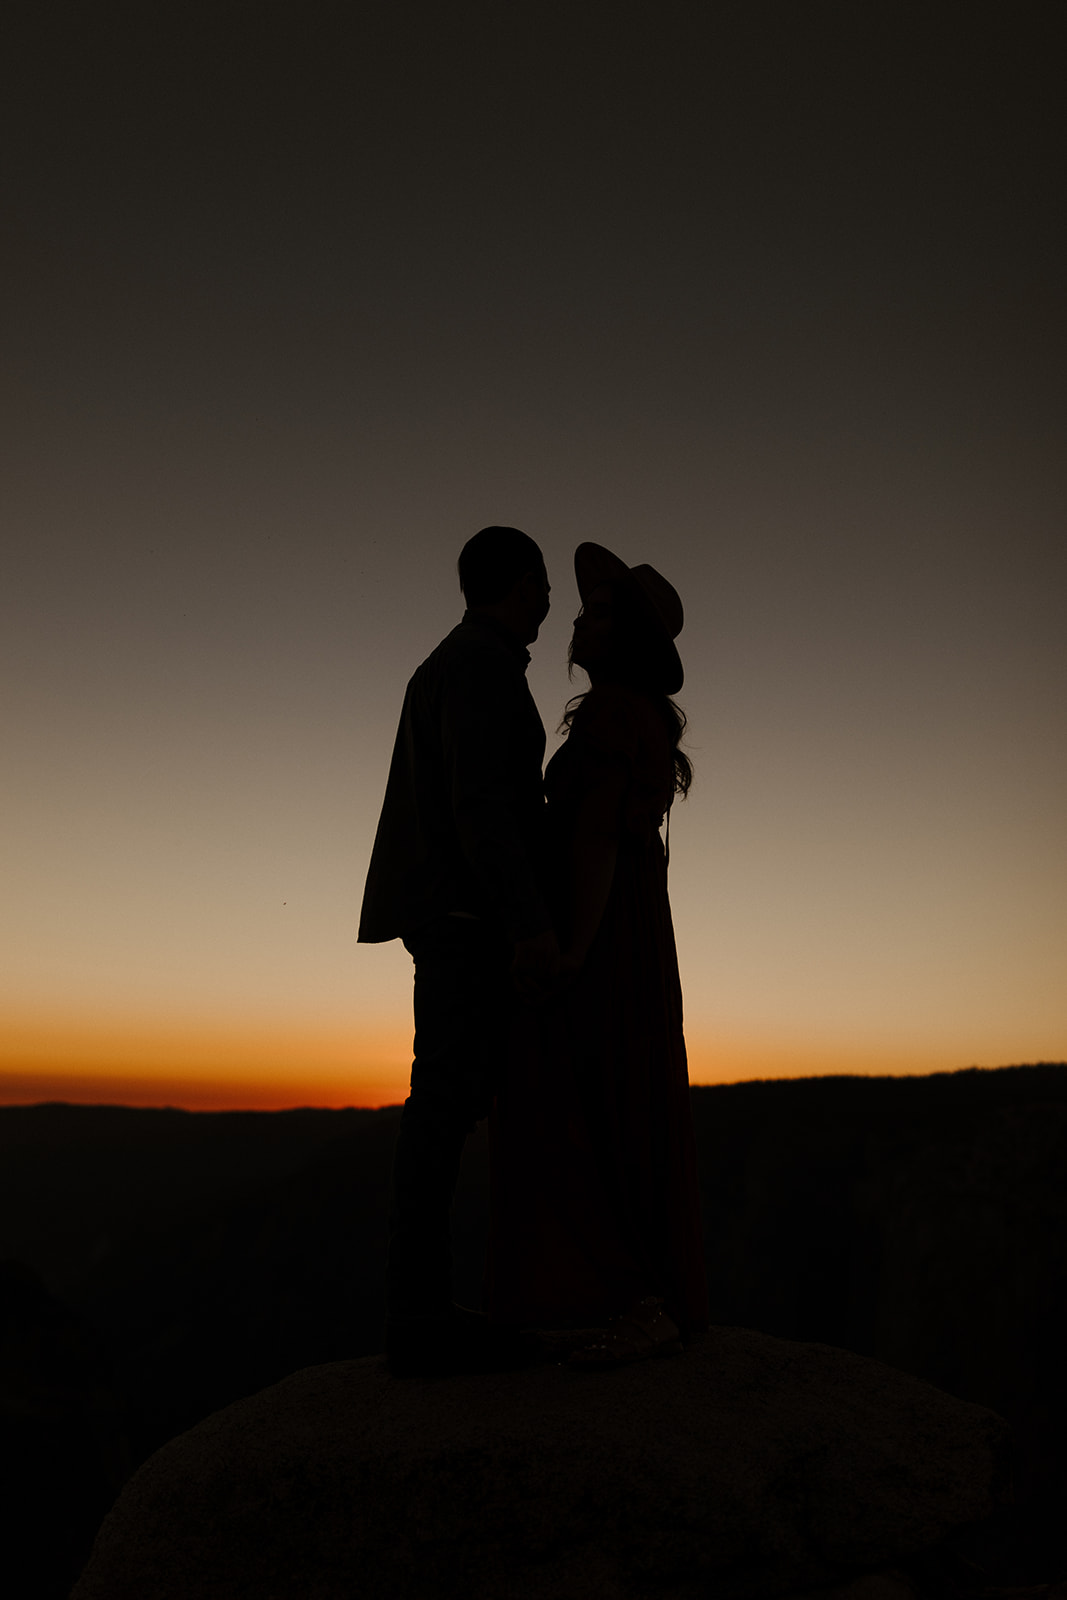 silhouettes of the couple at night with the last parts of sunset 